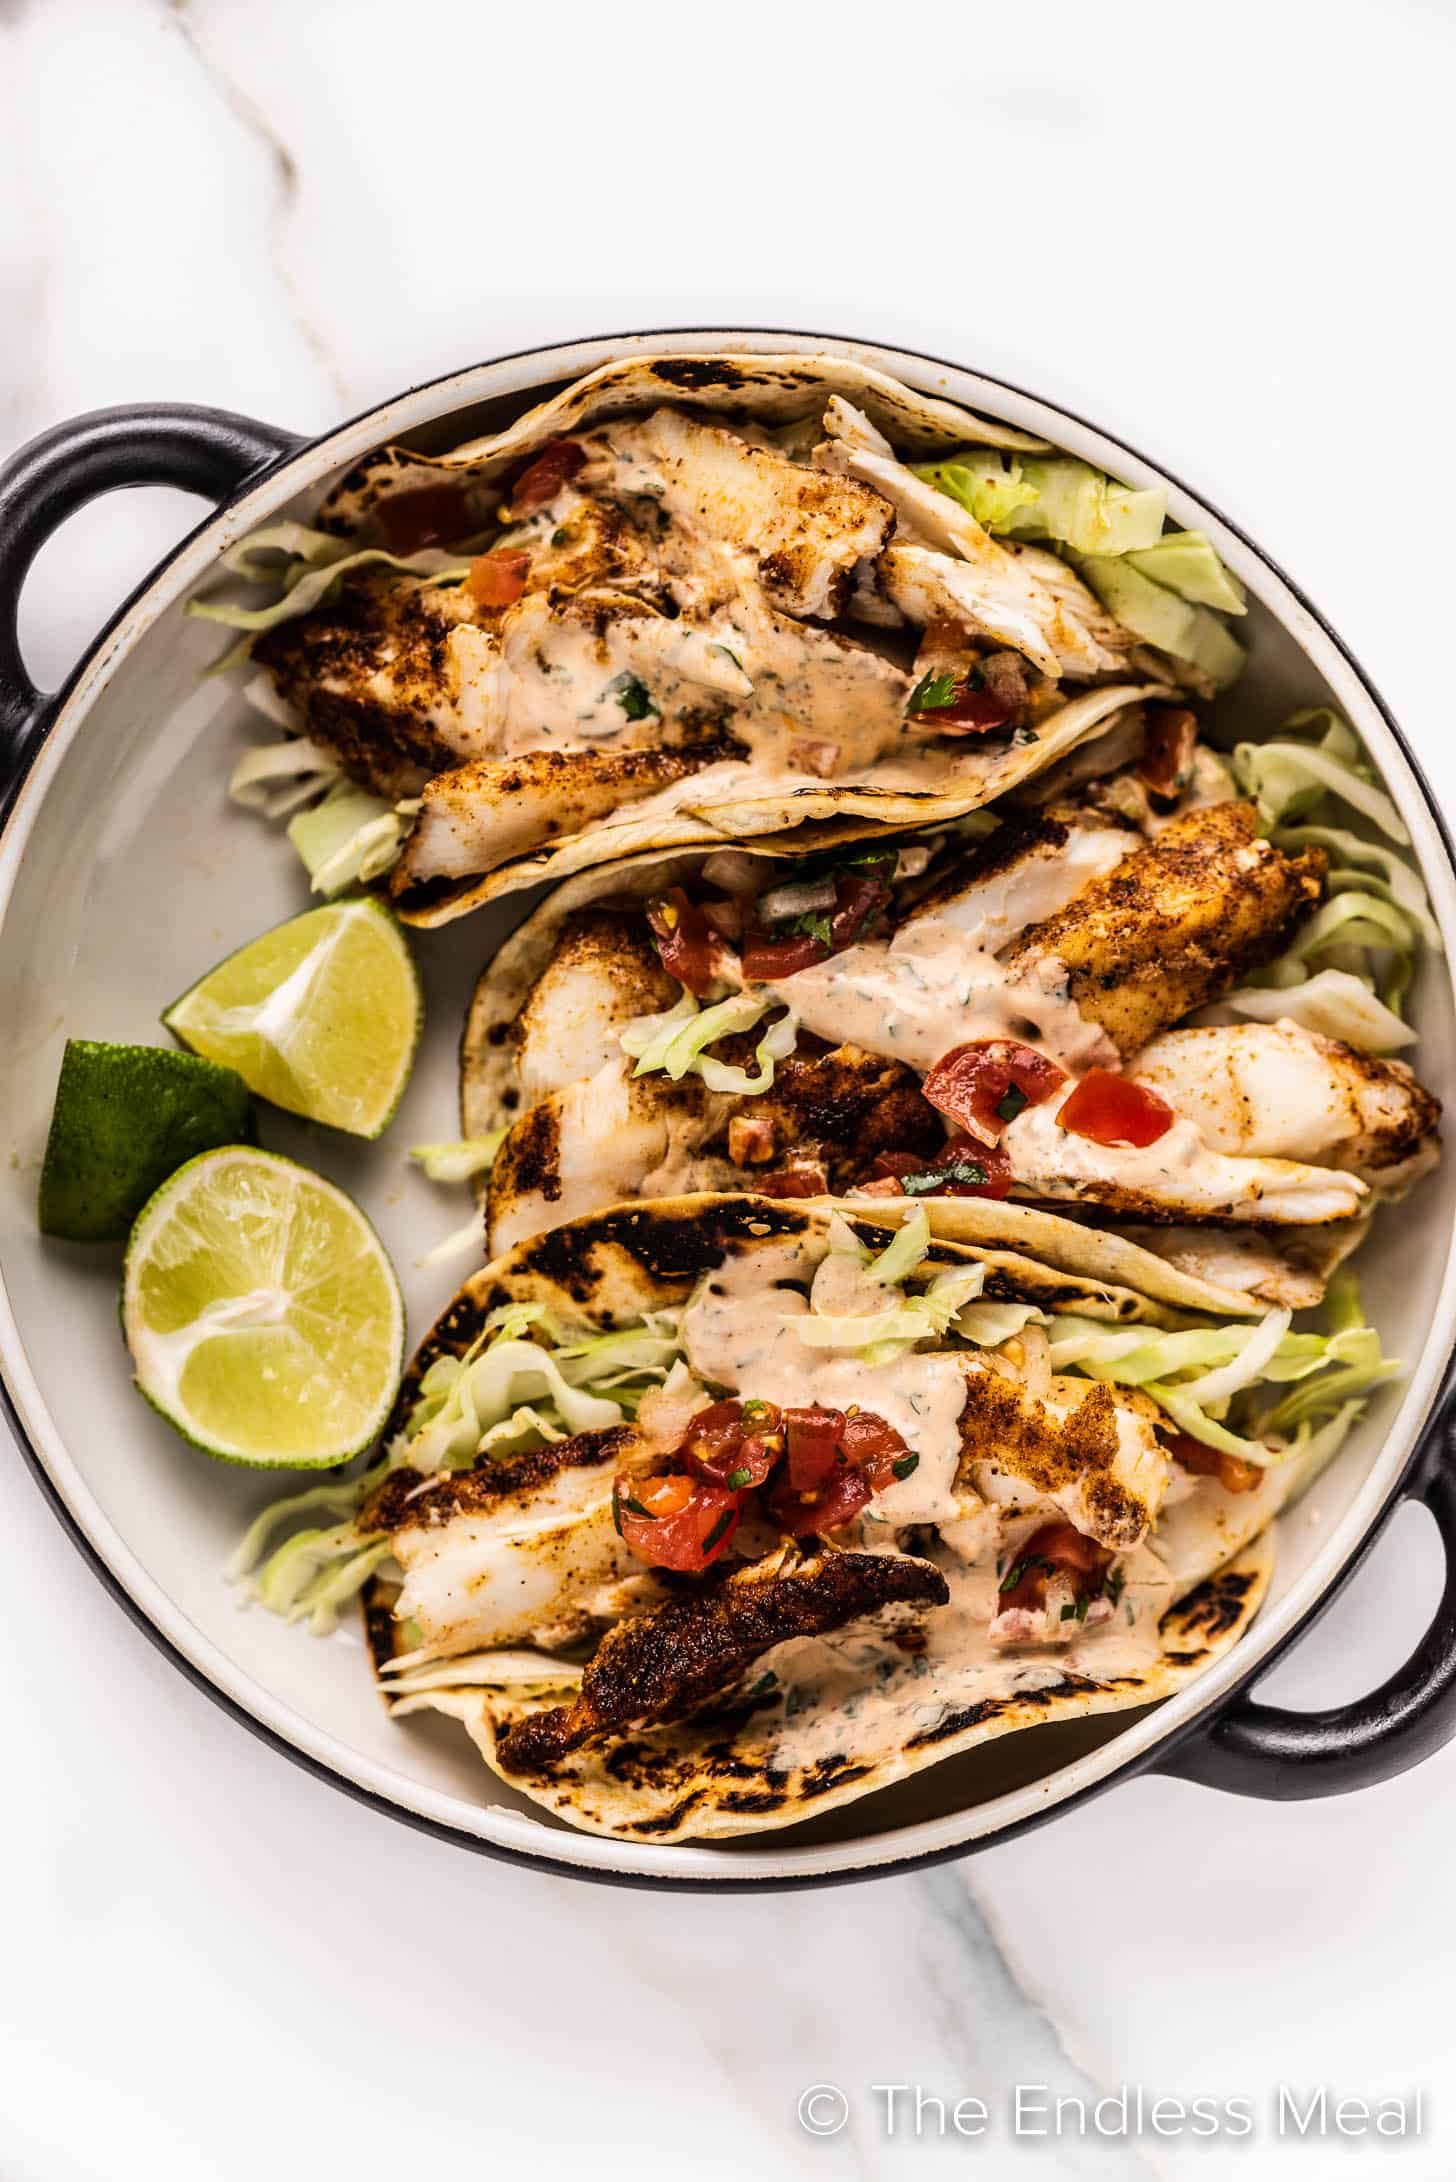 three Grilled Fish Tacos on a plate